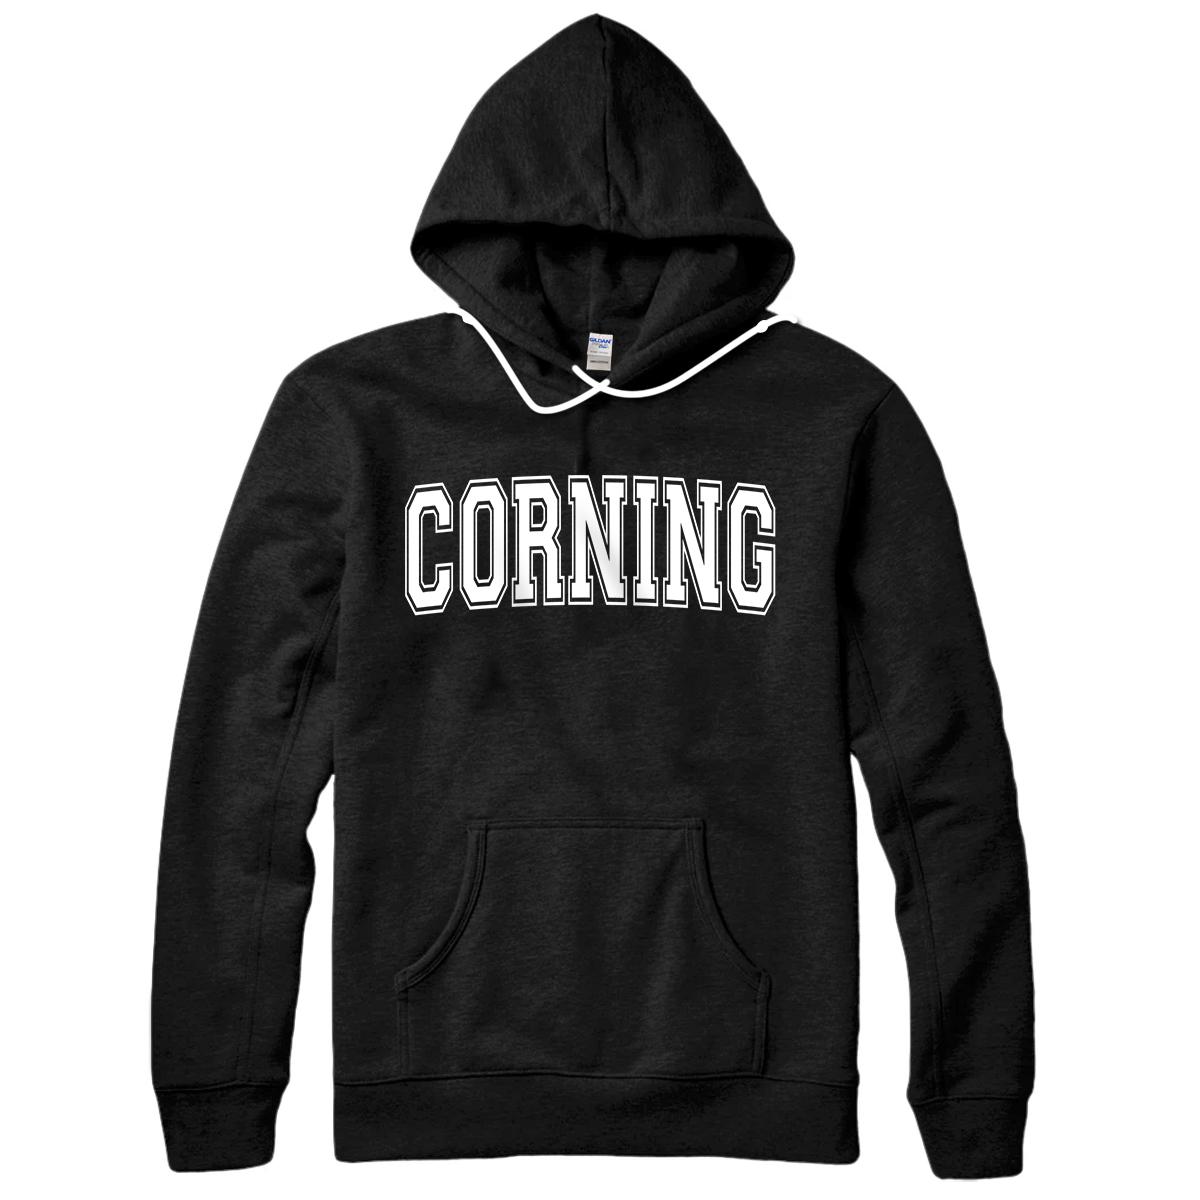 Personalized CORNING NY NEW YORK USA Vintage Sports Varsity Style Pullover Hoodie